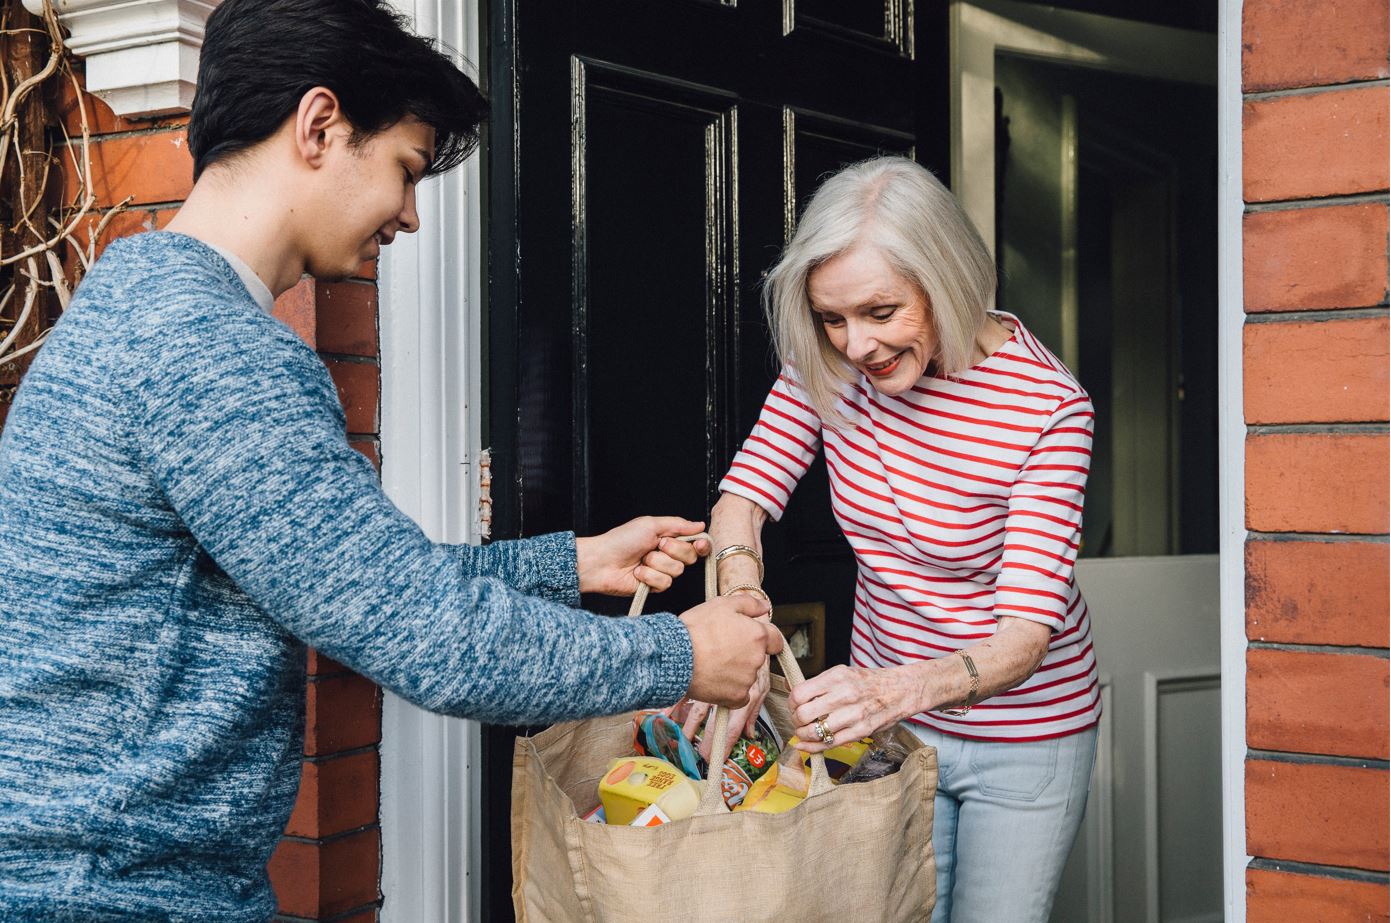 Dinner at Your Doorstep: The Convenience of Grocery Delivery